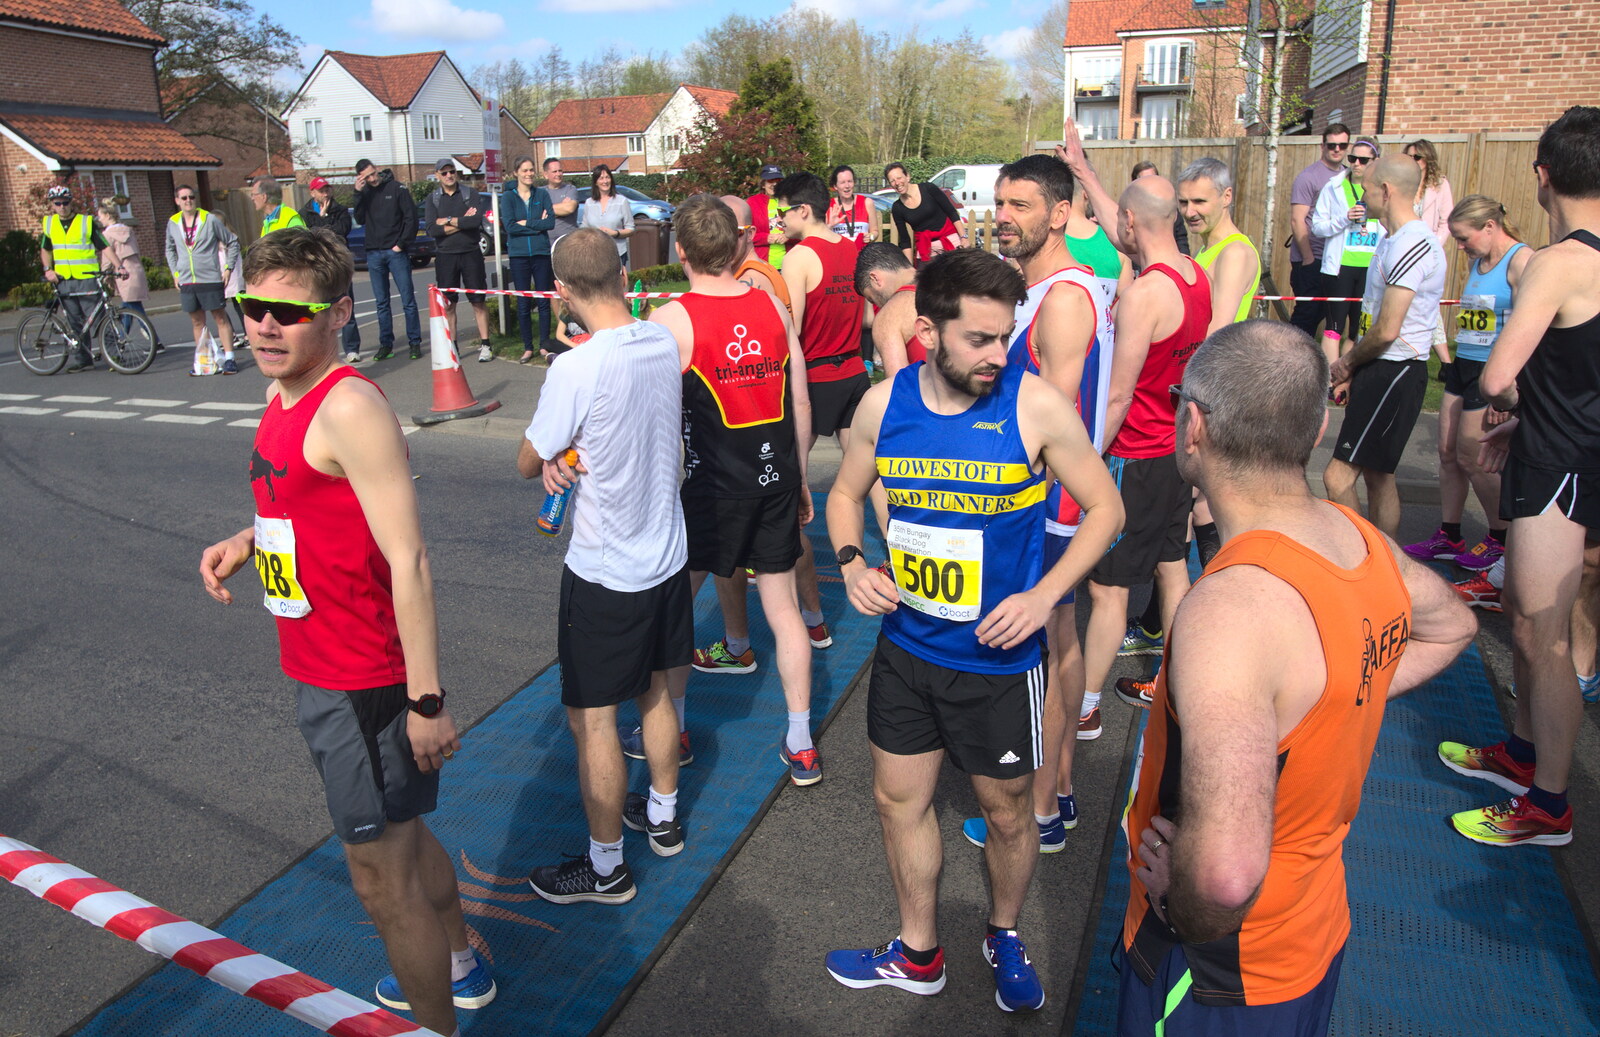 Half-marathon runners get ready from The Black Dog Festival of Running, Bungay, Suffolk - 2nd April 2017